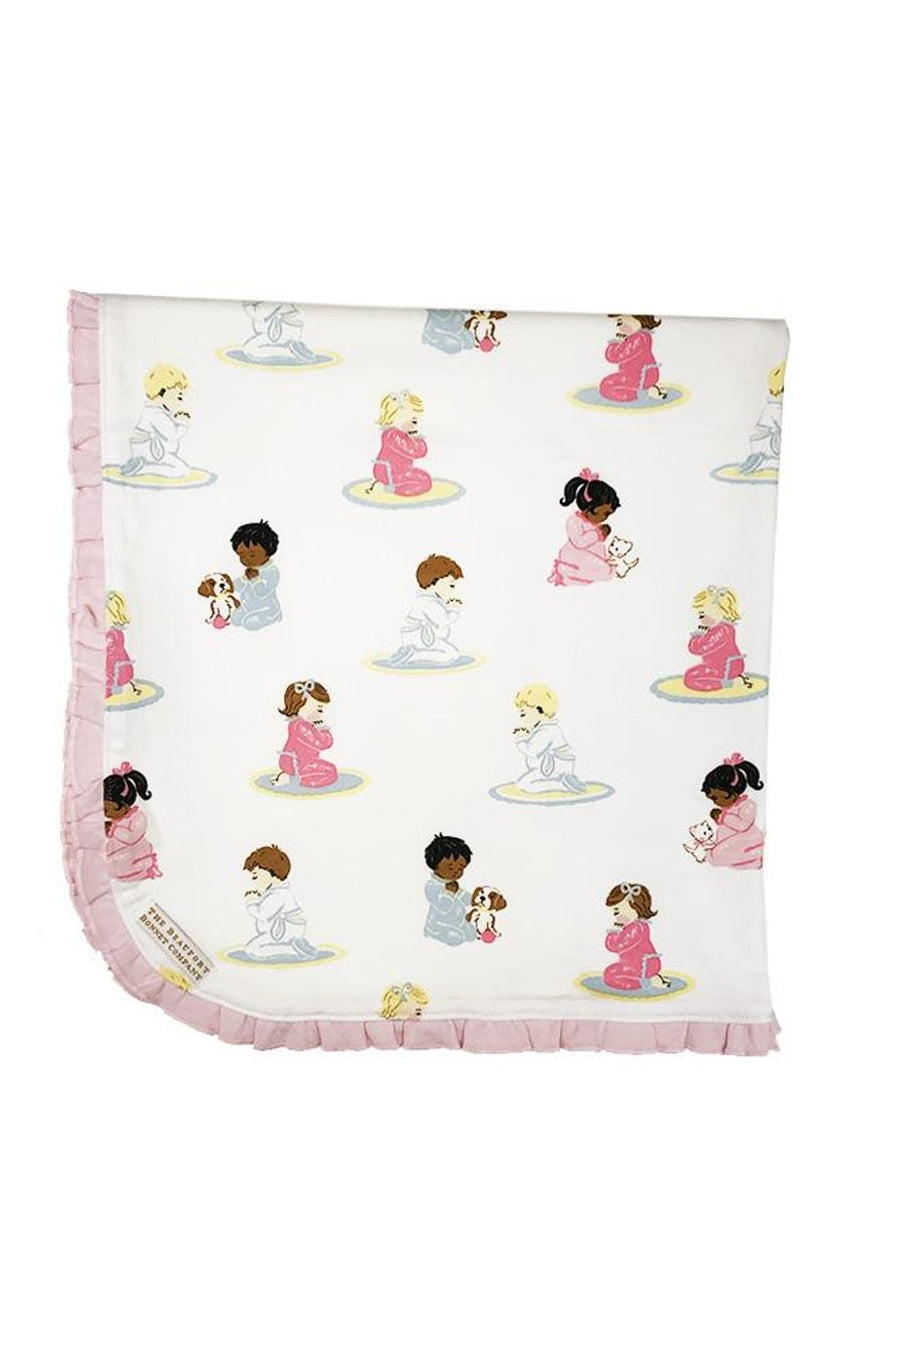 Beaufort Bonnet Baby Buggy Blanket- Patience and Prayer With Palm Beach Pink